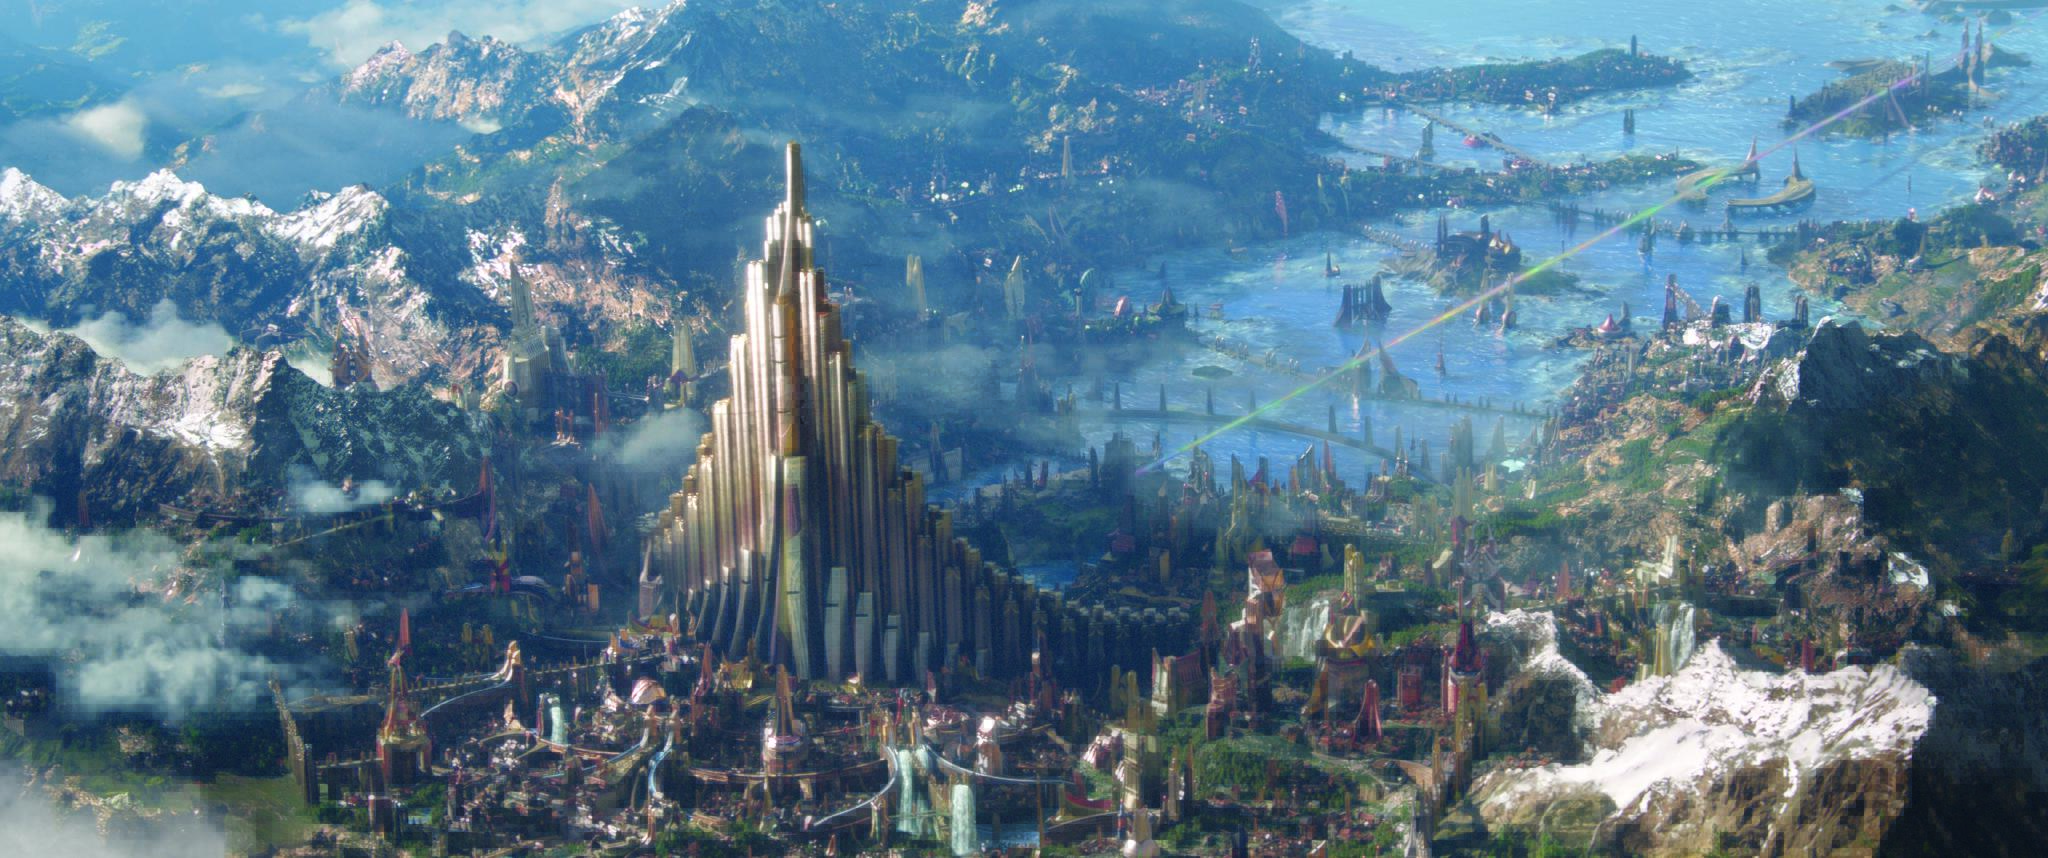 Asgard as it appears in Thor: Ragnarok, before, well, you know. (Image: Disney)